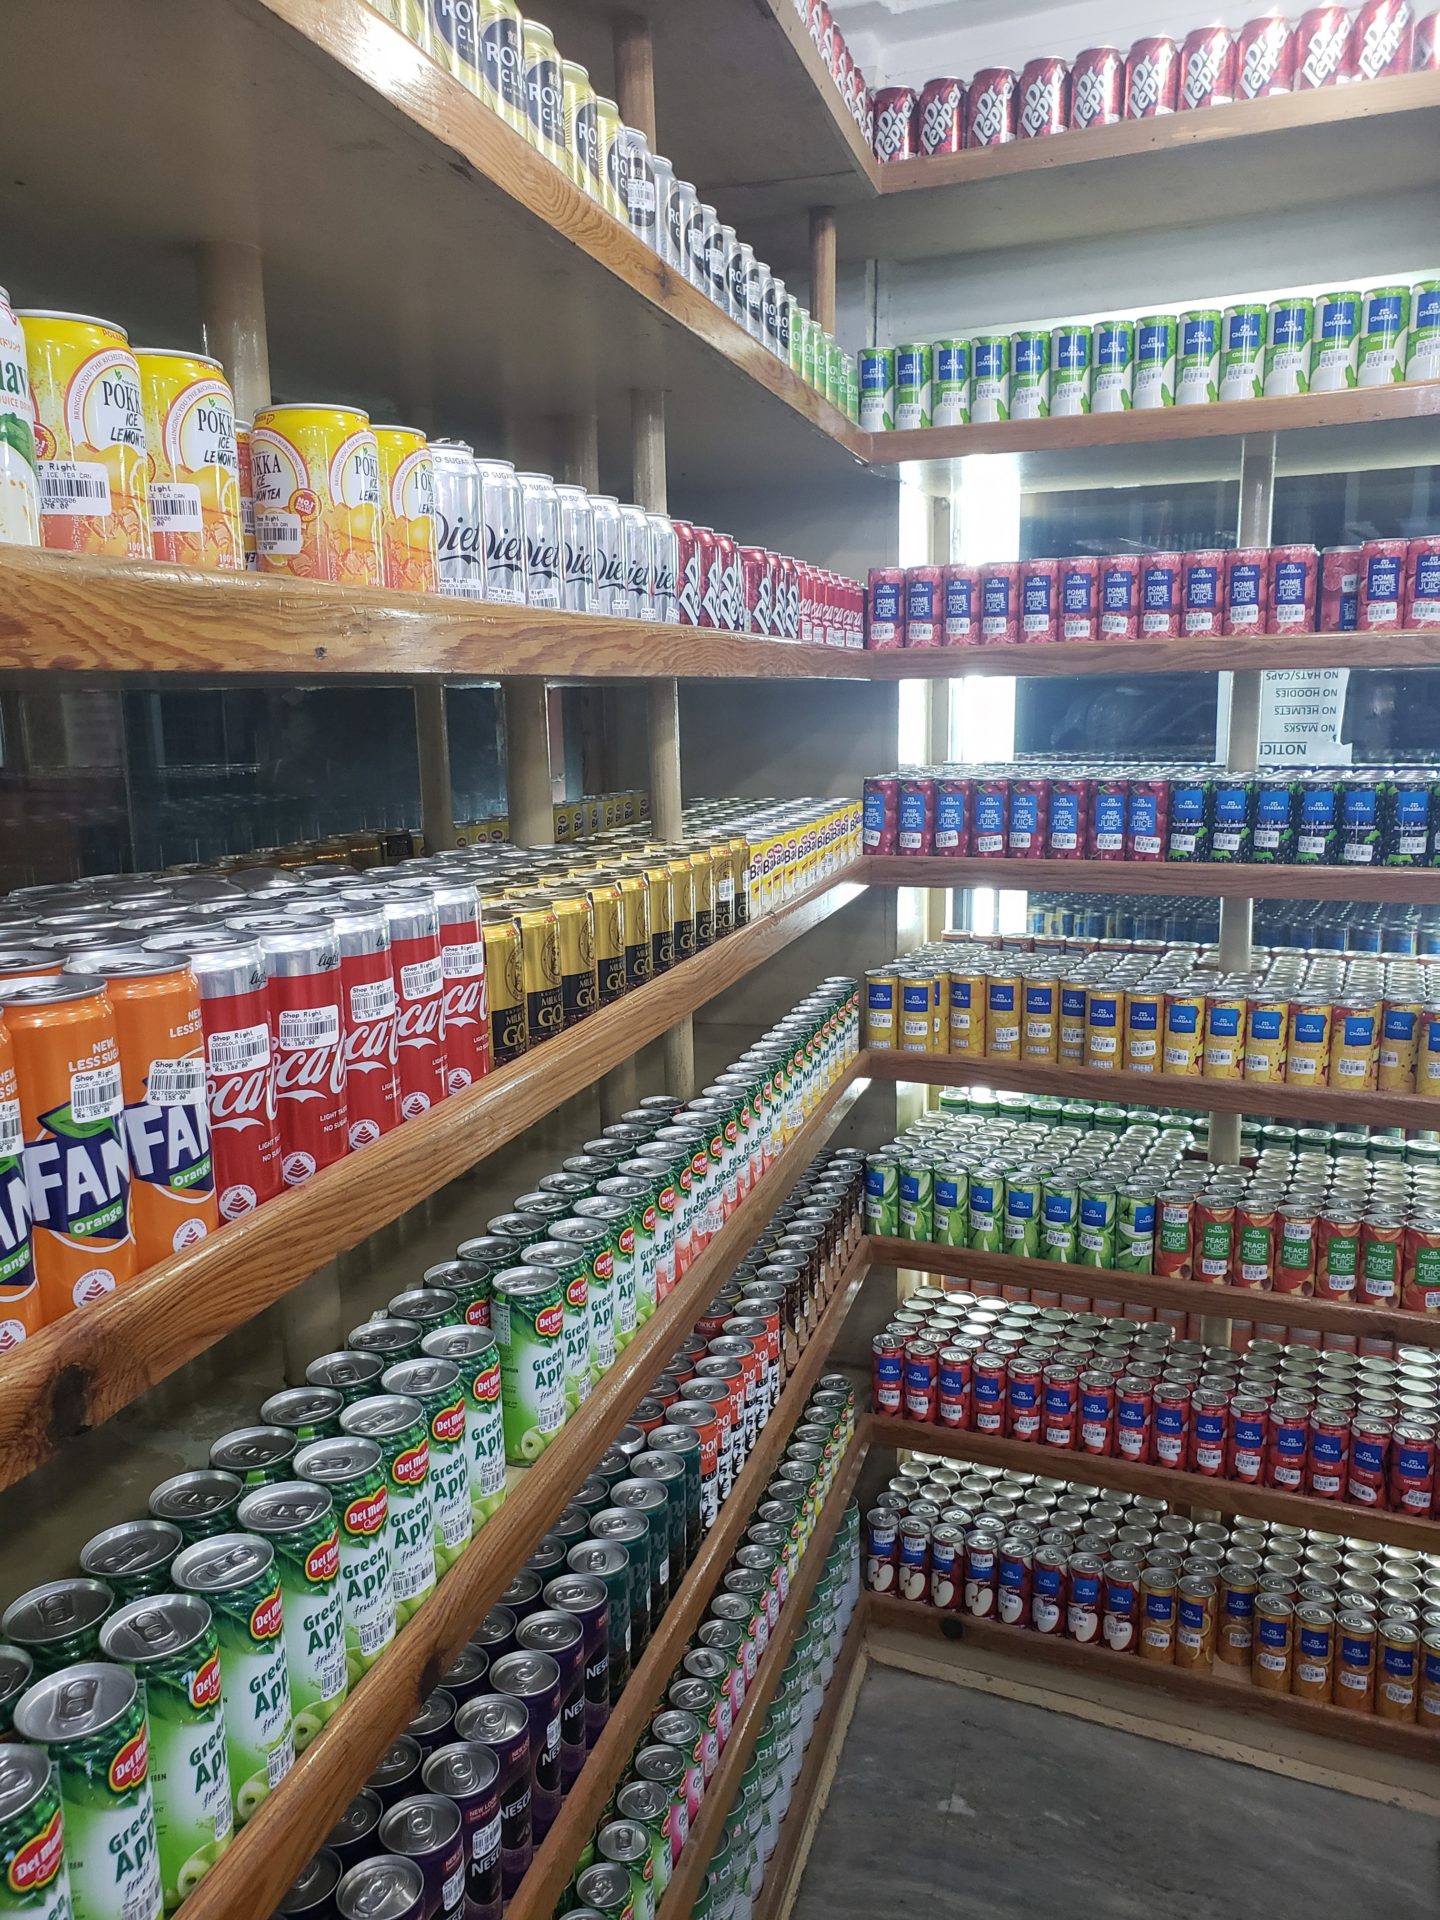 shelves with cans of beer and cans of different flavors